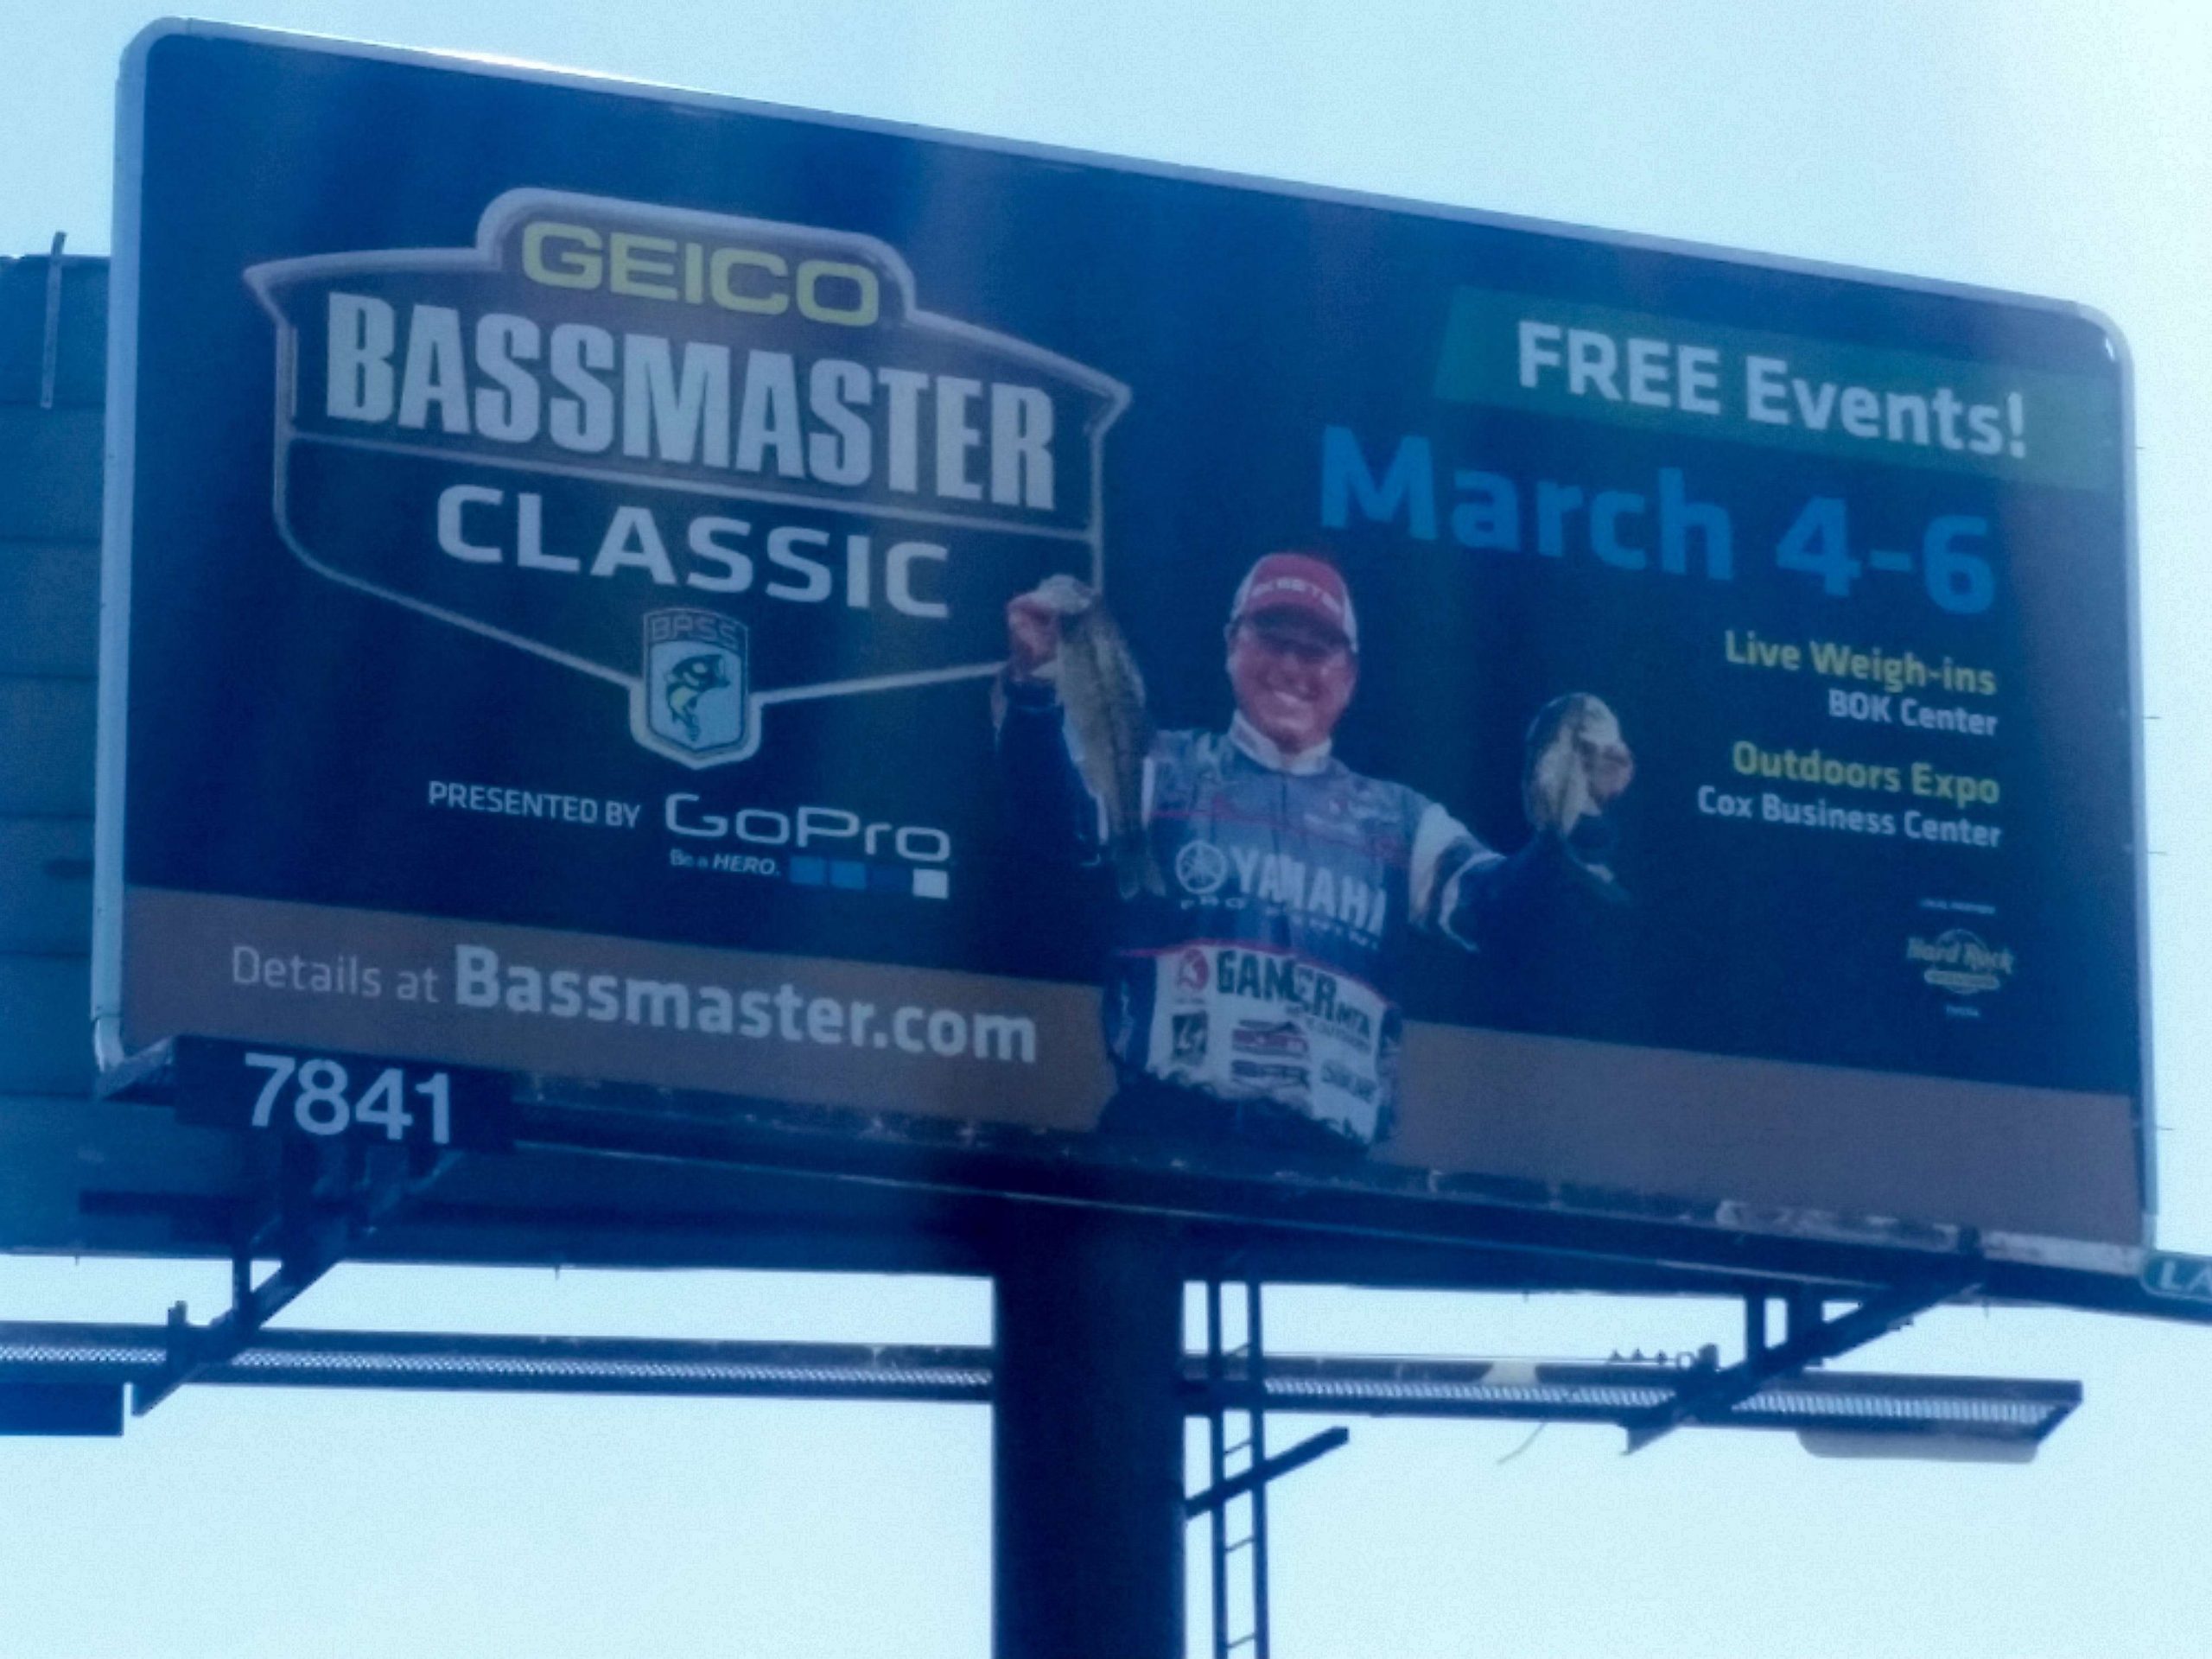 This week, for Catch a Cure, I was excited to preview one of the most well-known events in the world of fishing, the Bassmaster Classic, being held this year at Grand Lake Oâ the Cherokees, near Tulsa, Okla. Iâve always wondered how these professional anglers turn something as fun as fishing into a living. When there are cash prizes of up to $300,000 on the line, youâd better believe that the B.A.S.S. pros know exactly what theyâre doing in a way most of us never will. My trip to fisheries across the country is raising funds for the Melanoma Research Foundation, and you can help, too, at http://events.melanoma.org/catchacure. Click through to see how my trip to Grand Lake went in anticipation of the 2016 GEICO Bassmaster Classic presented by GoPro.